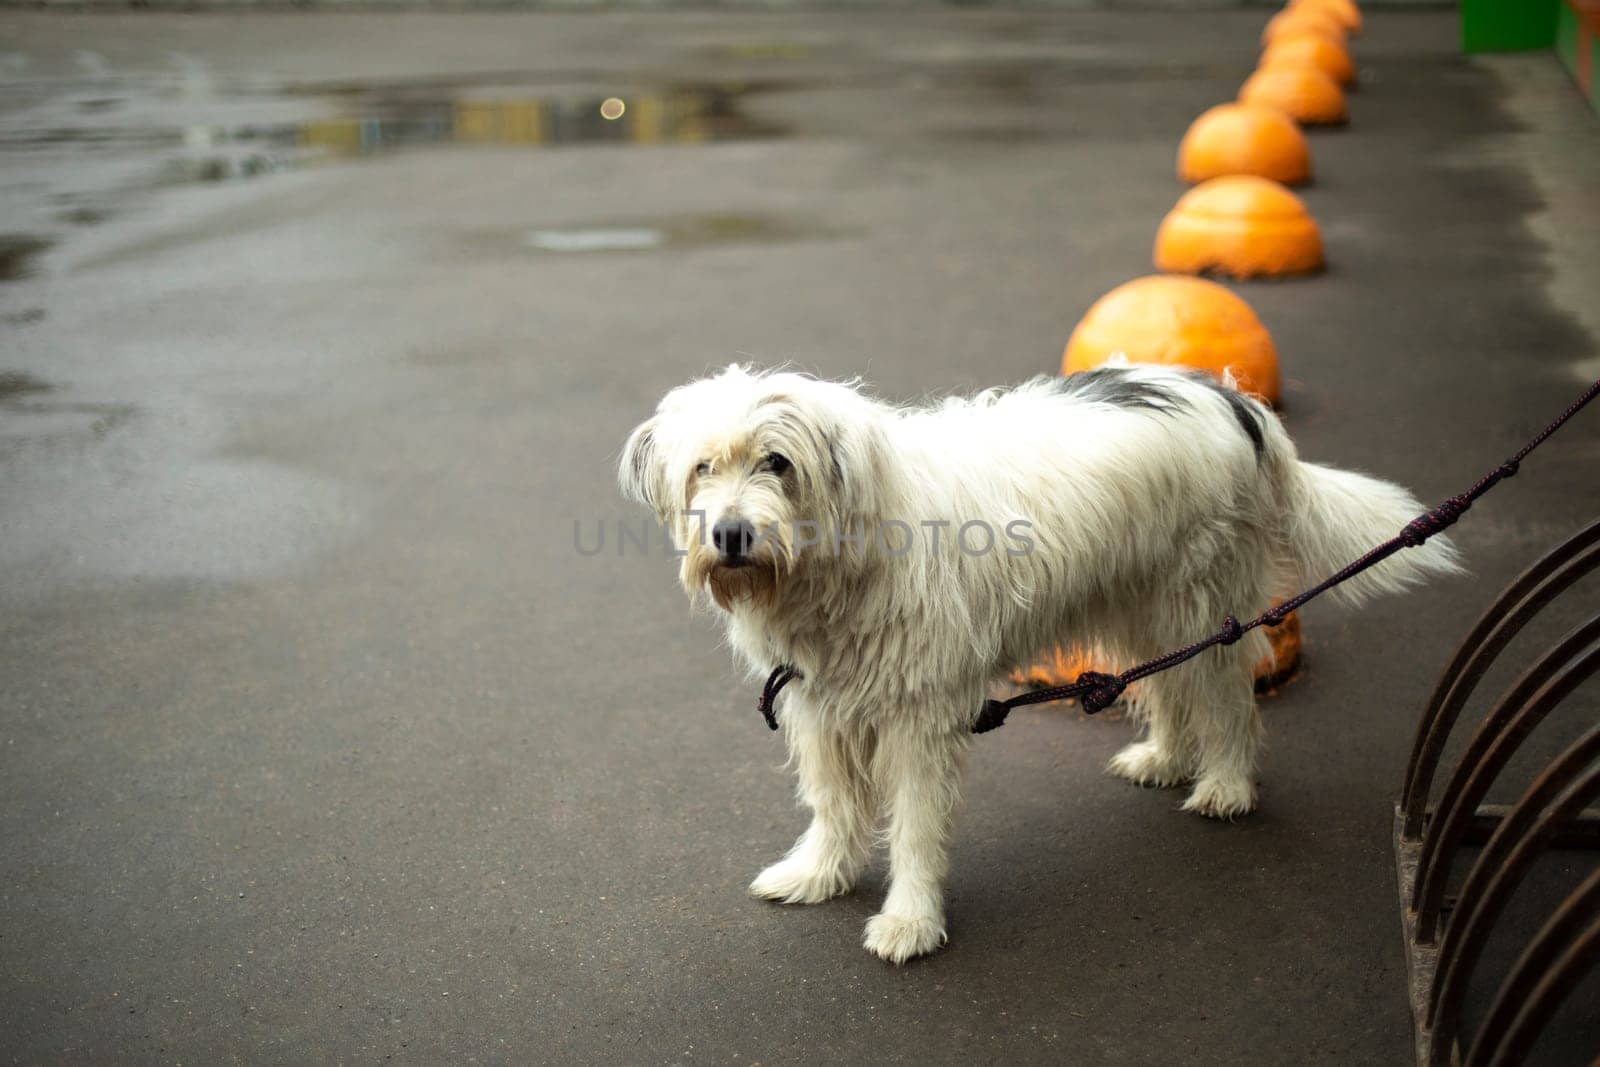 Dog is tied up in parking lot. Pet with white hair. by OlegKopyov